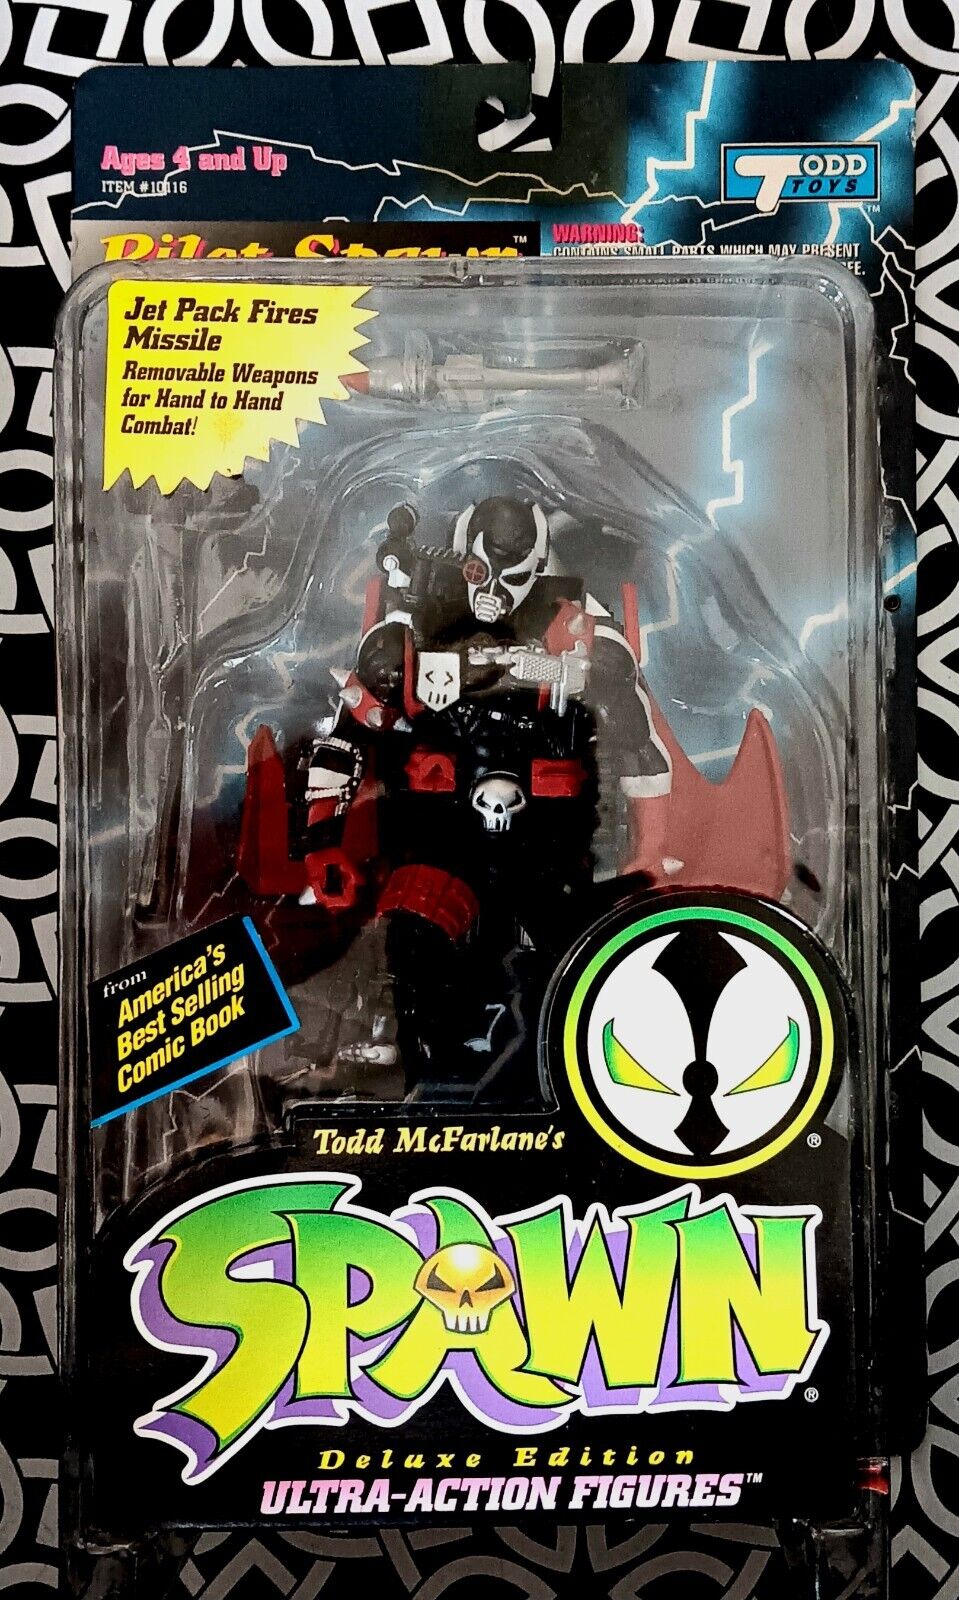 Adorable Pilot Spawn – Ultra-Action Figure Deluxe Edition – 1995 – Mcfarlane Toys 🔥  on eBay